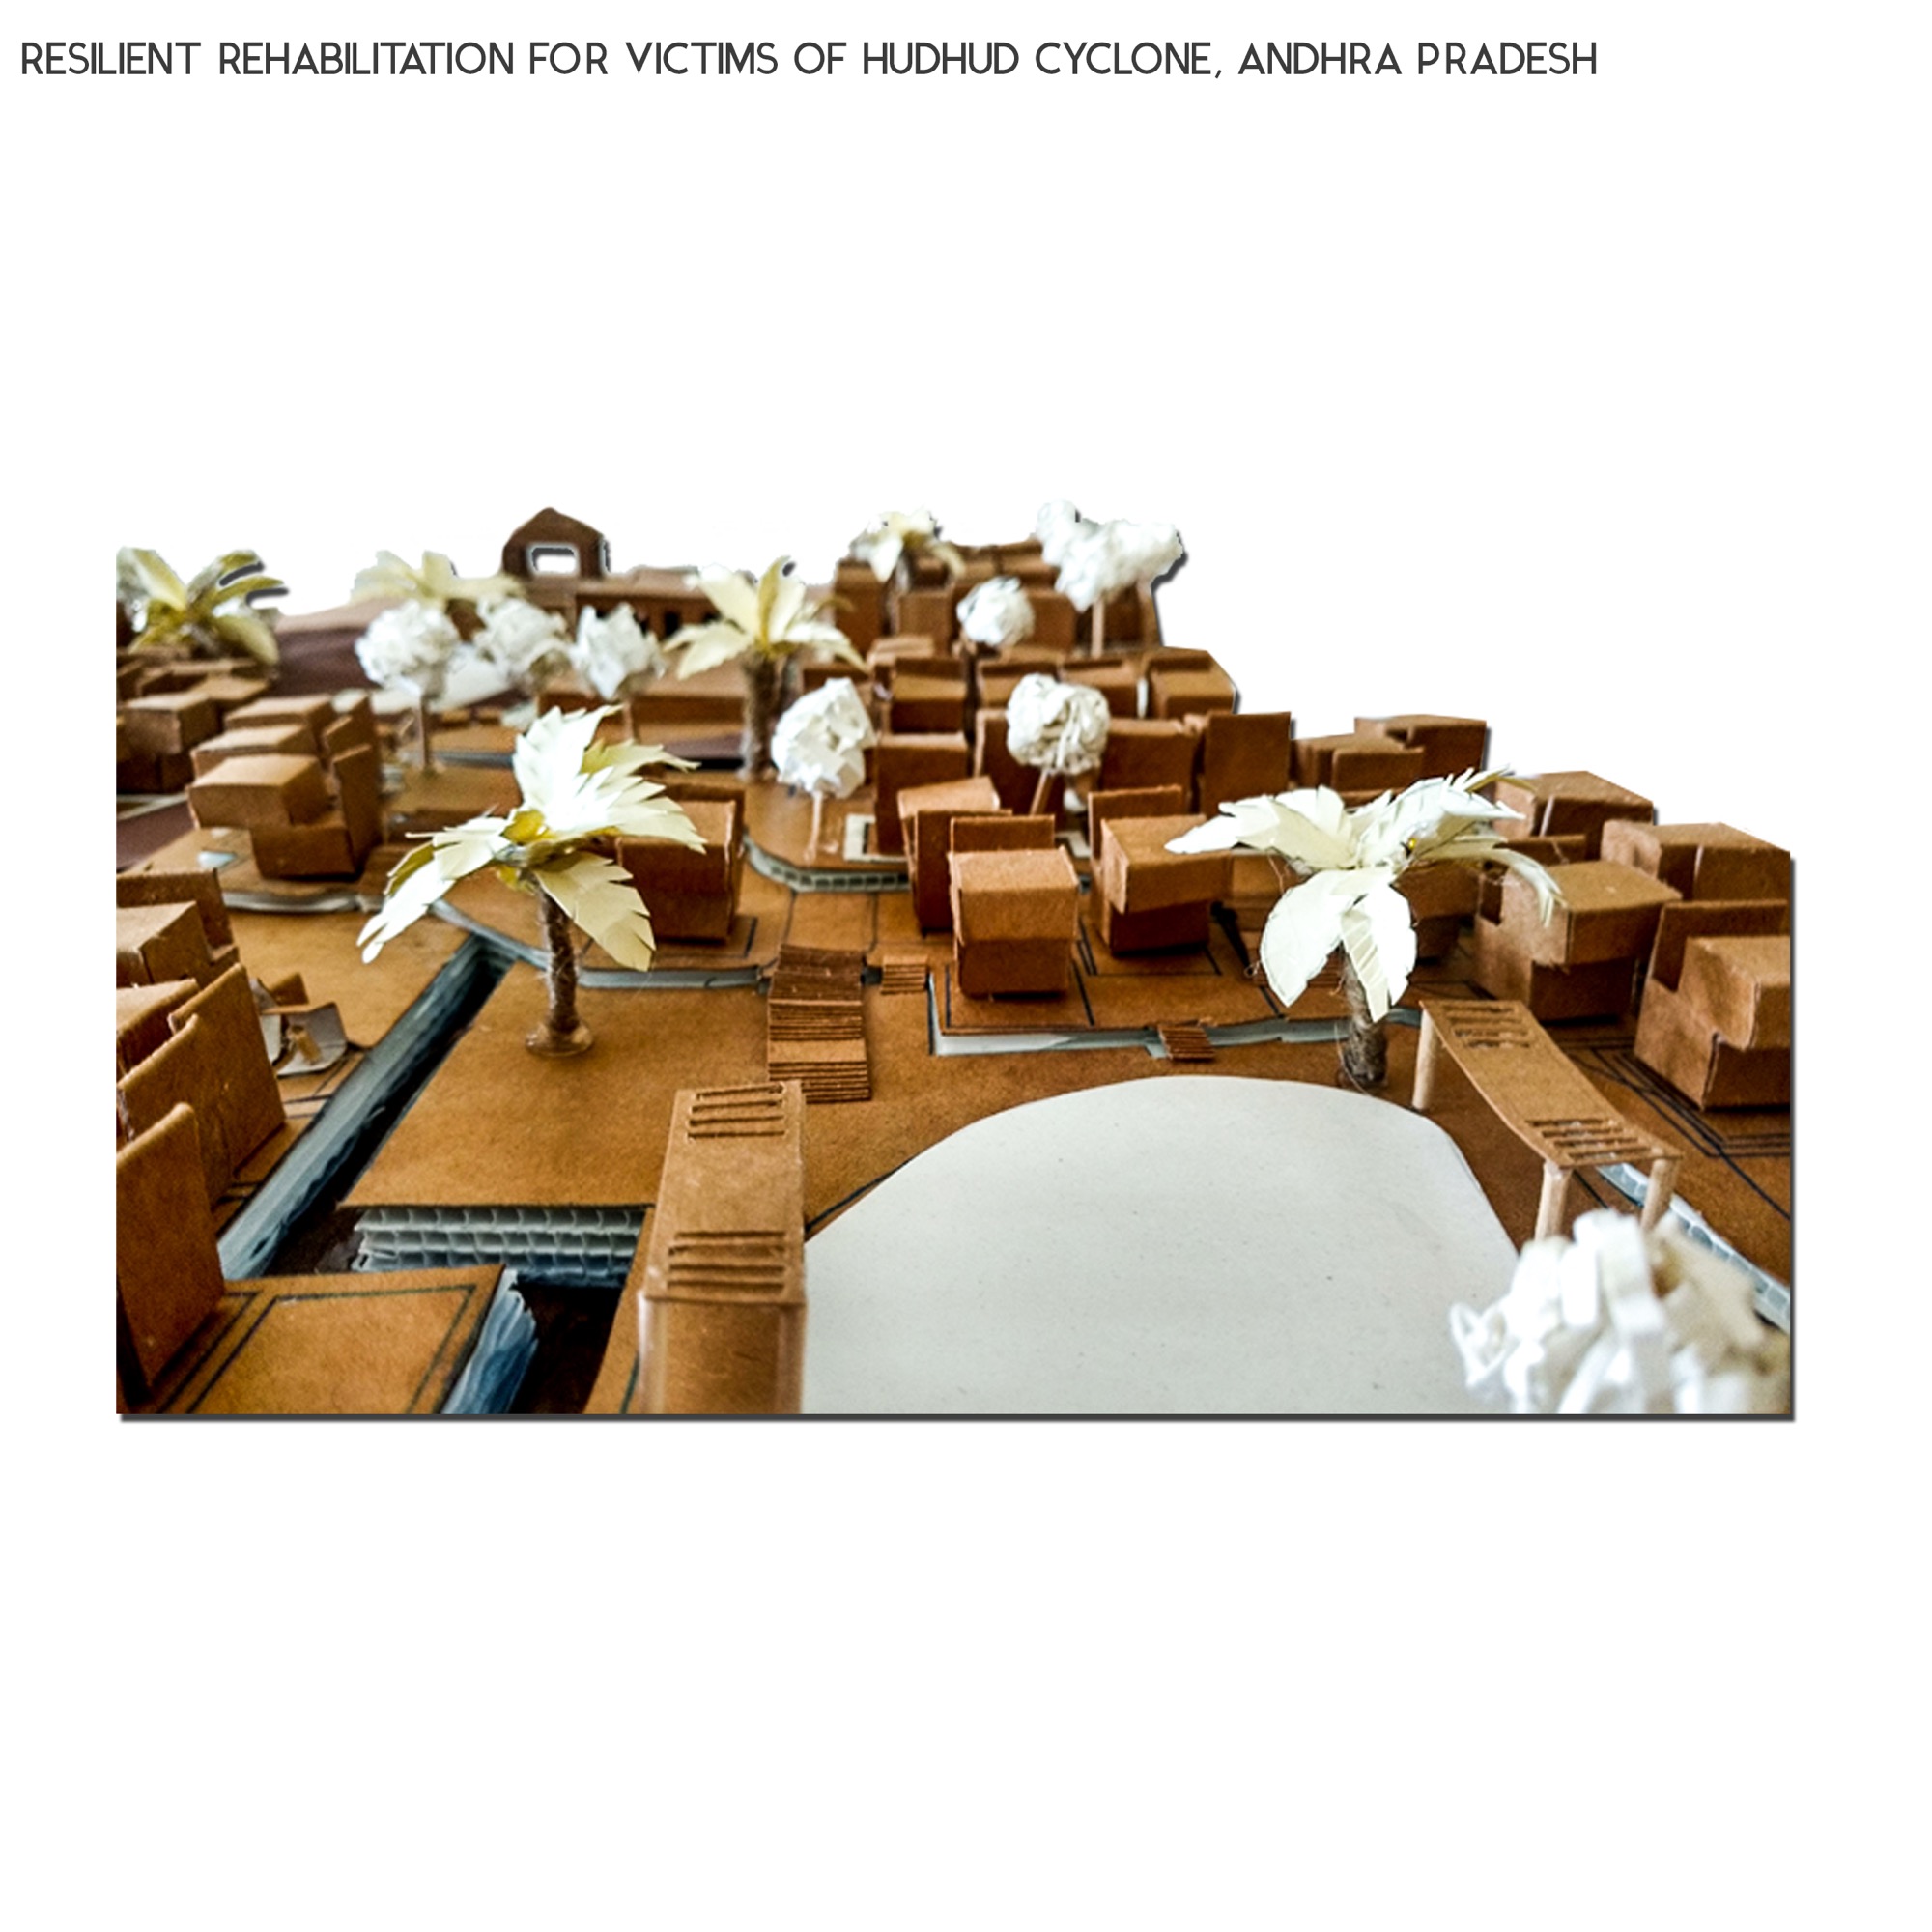 B.Arch Thesis: RESILIENT REHABILITATION FOR VICTIMS OF HUDHUD CYCLONE, ANDHRA PRADESH, by Sanand Telang 55